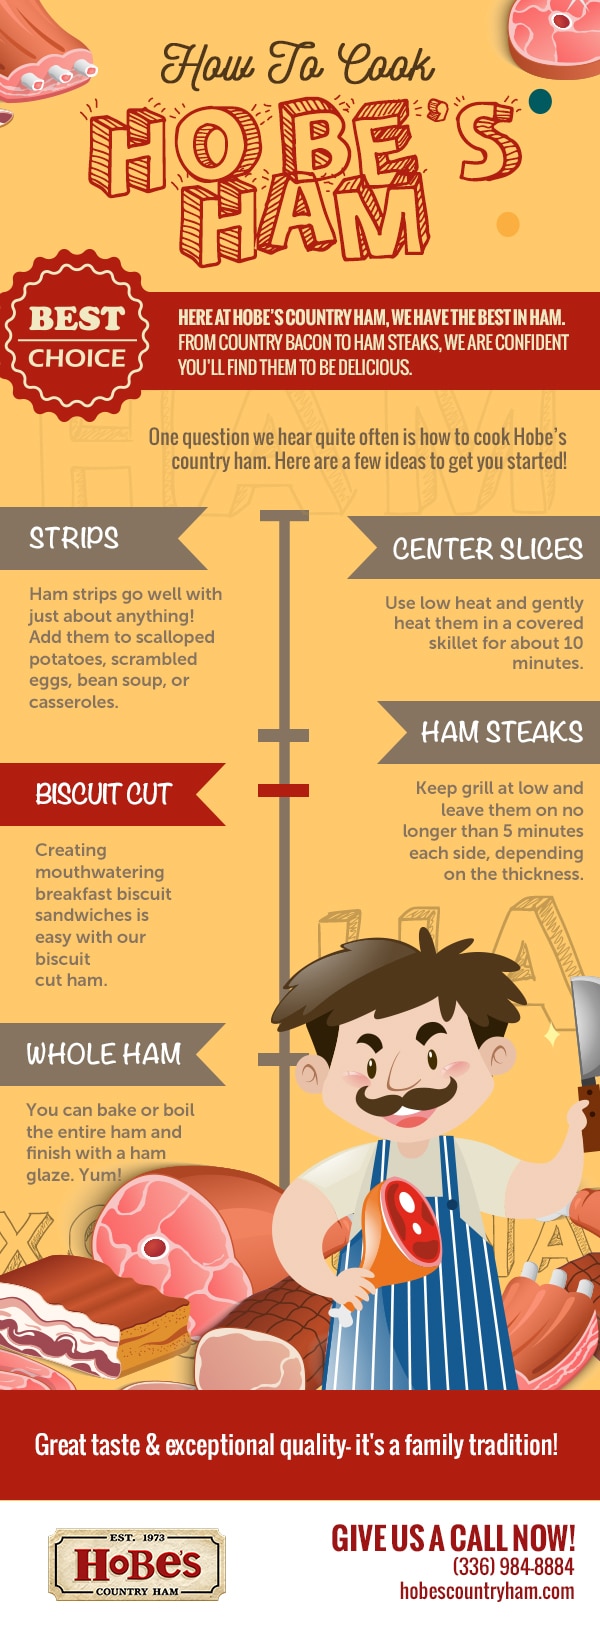 How to Cook Hobe’s Ham [infographic]